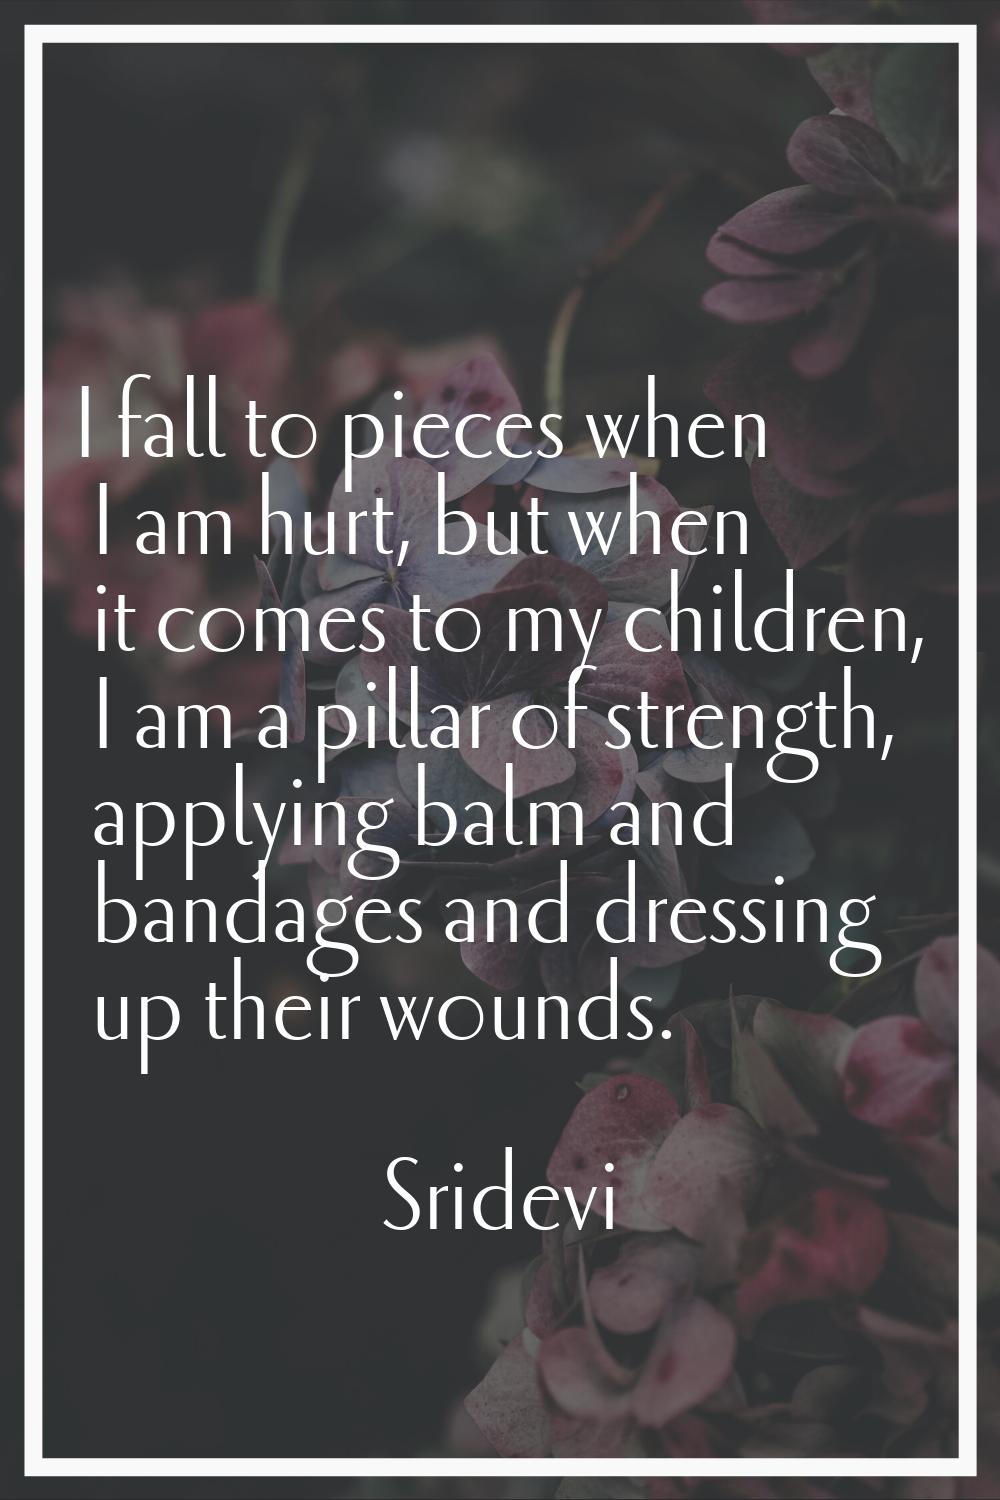 I fall to pieces when I am hurt, but when it comes to my children, I am a pillar of strength, apply